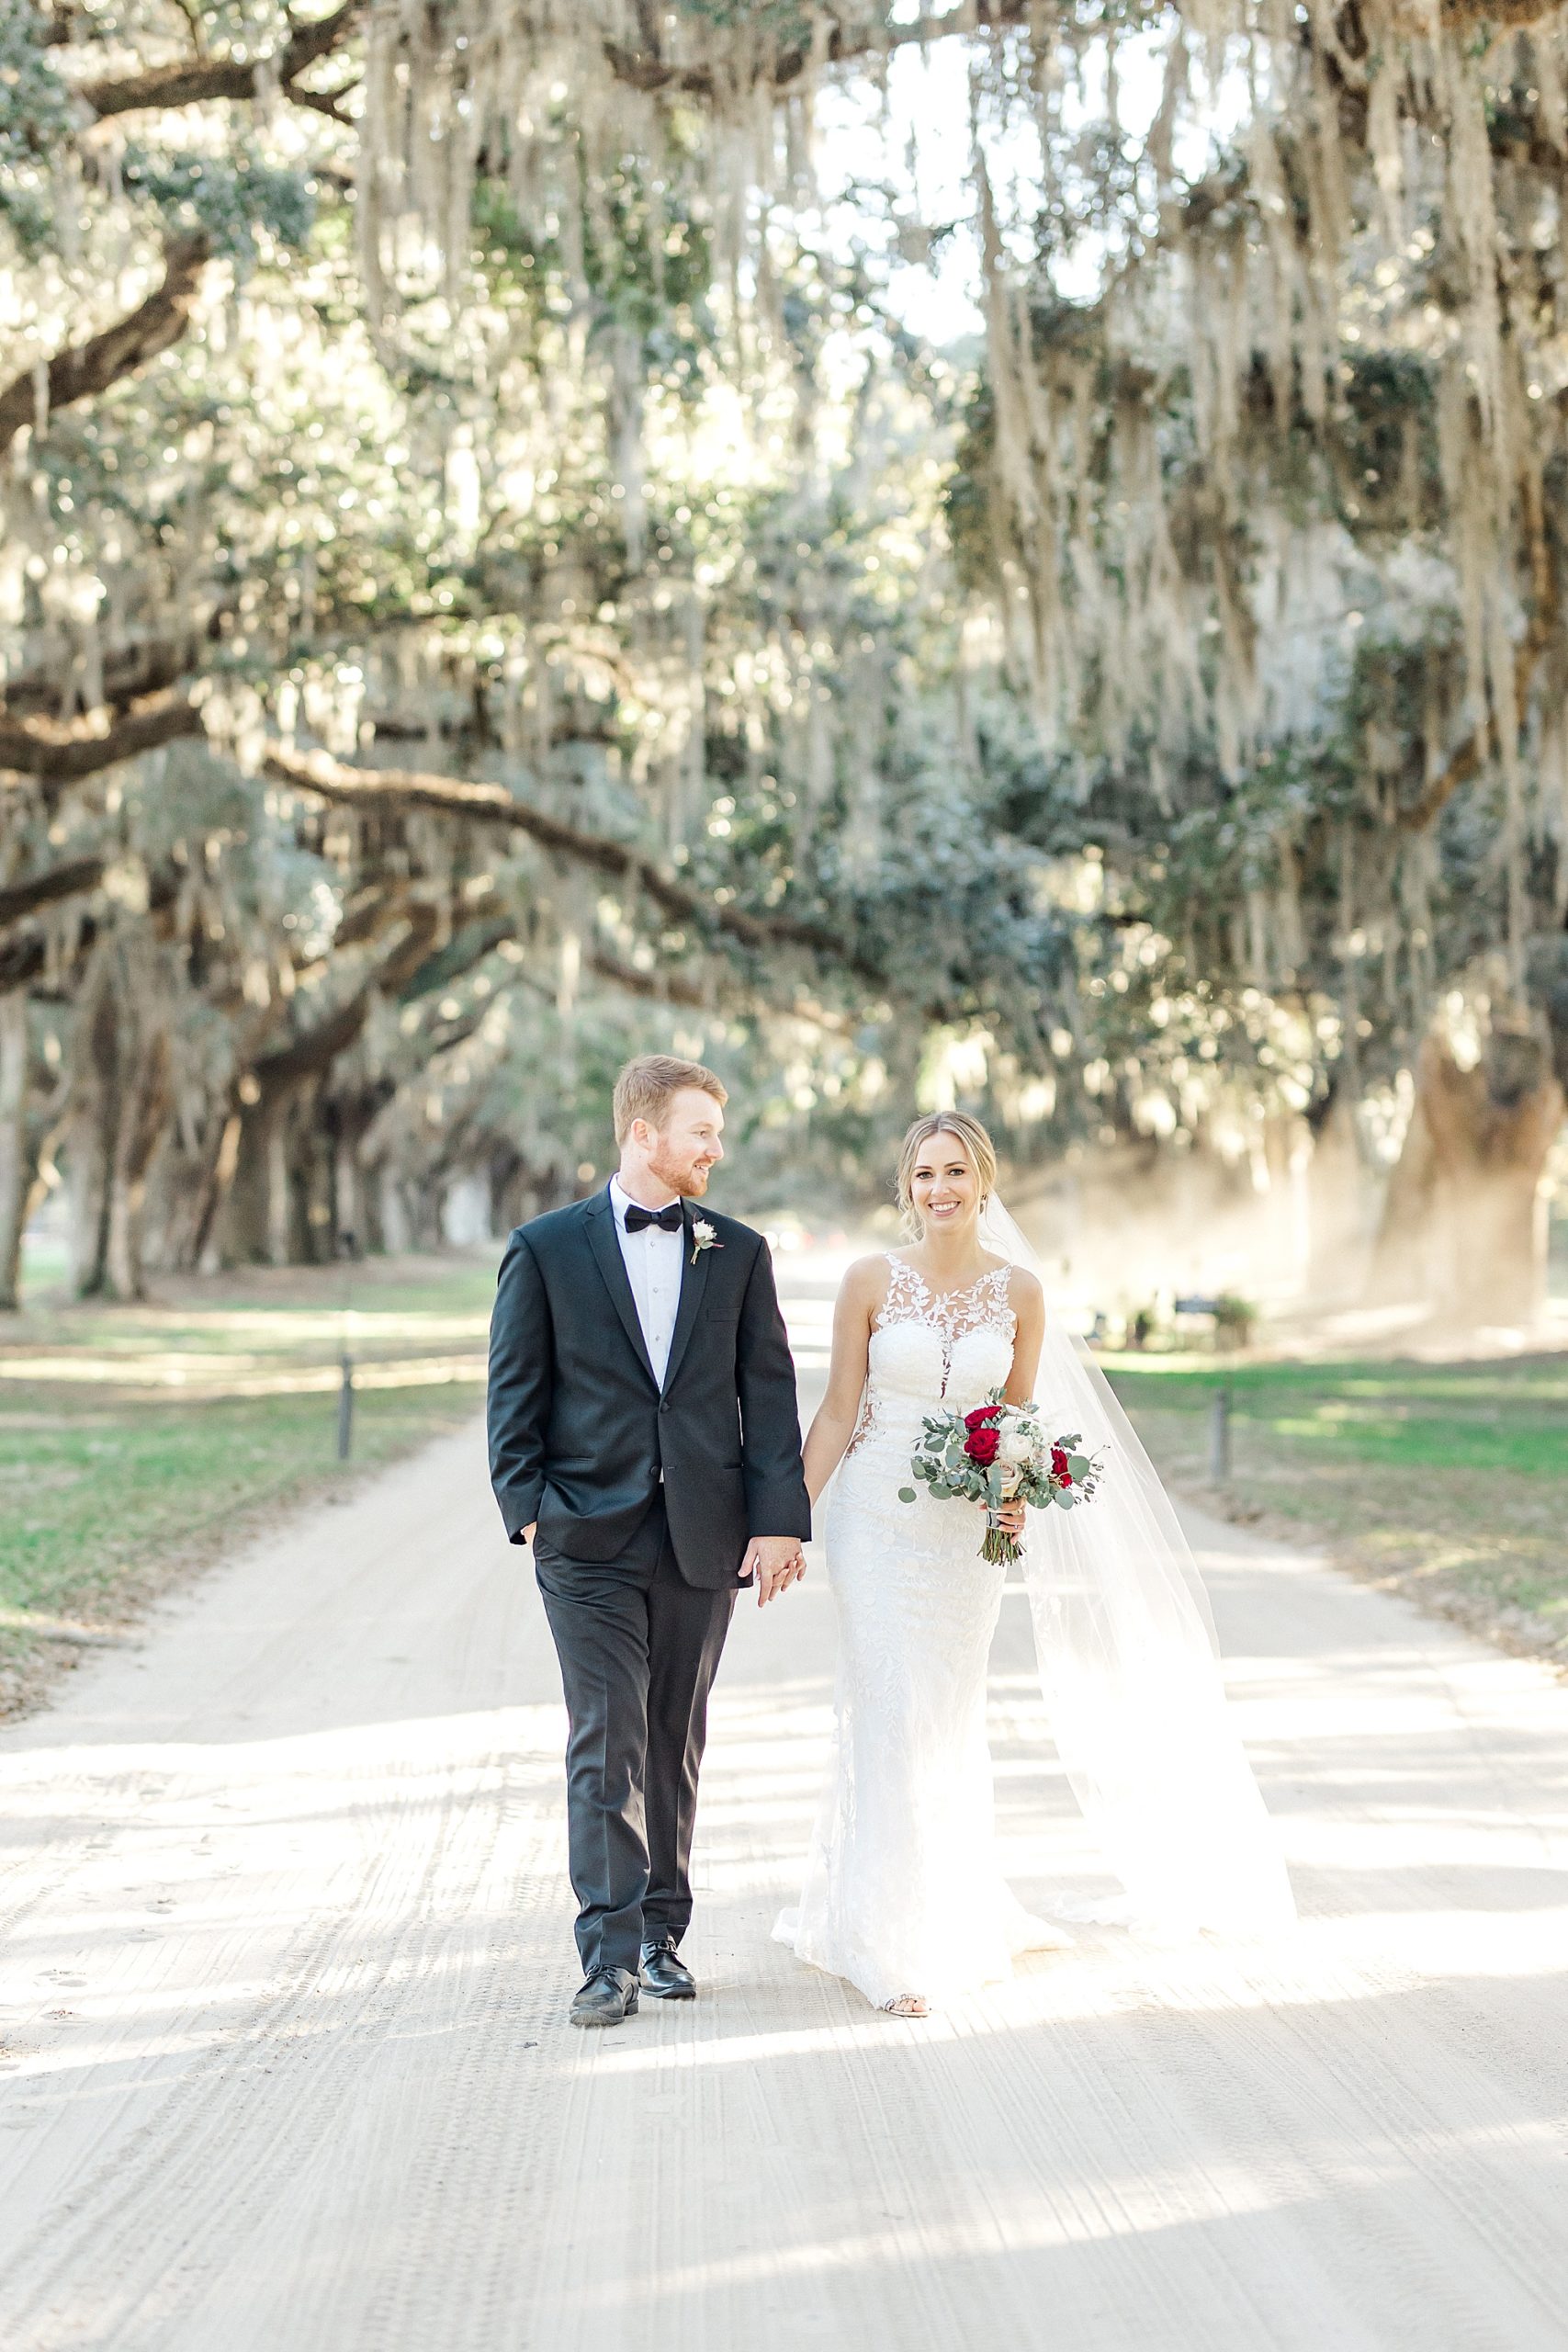 spanish moss covered trees frame the bride and groom